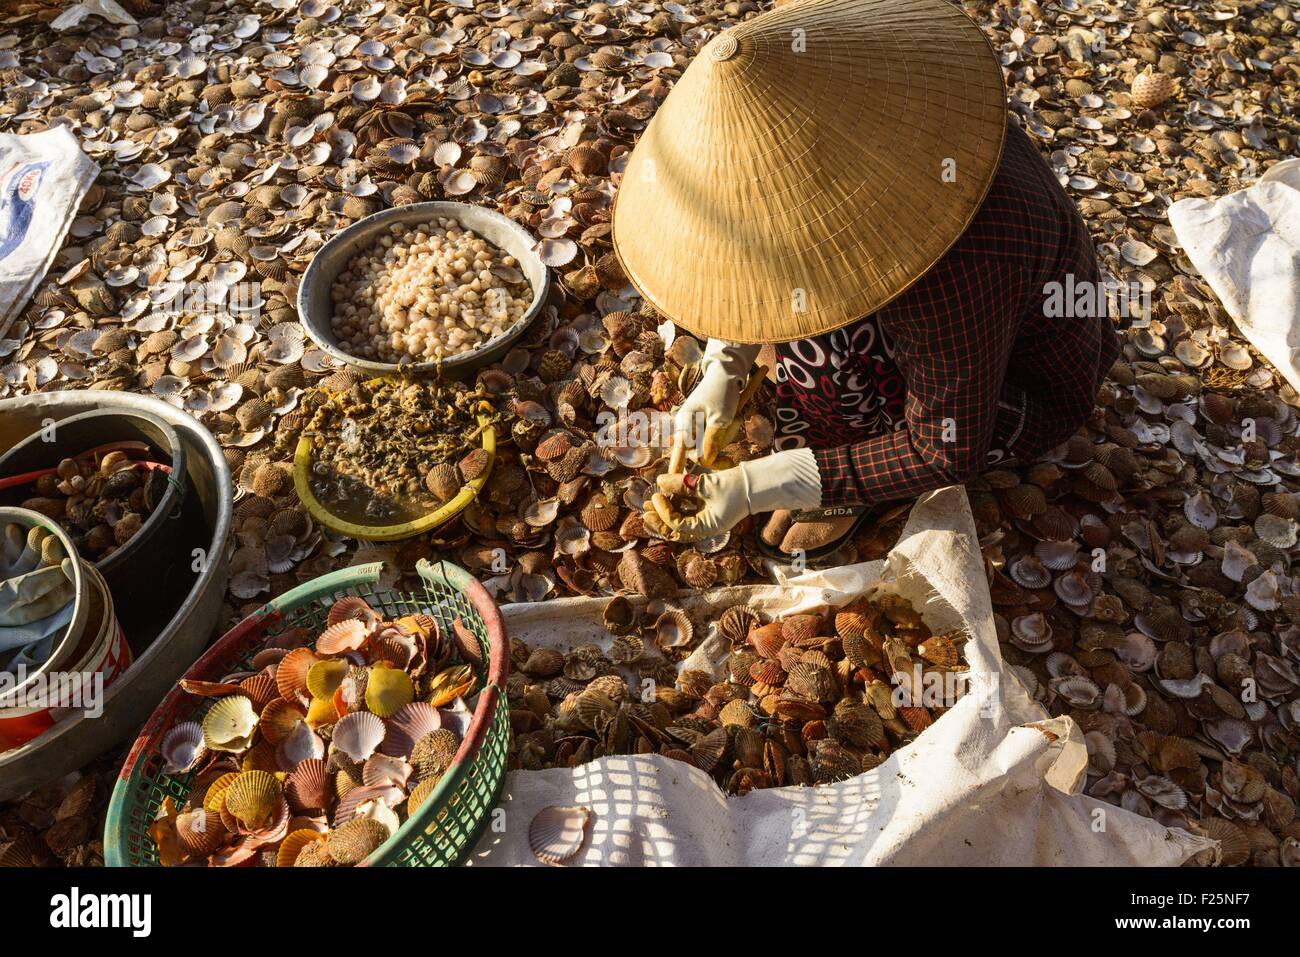 Vietnam, Ninh Thuan province, Chi Cong, shelling clams and scallop Stock Photo